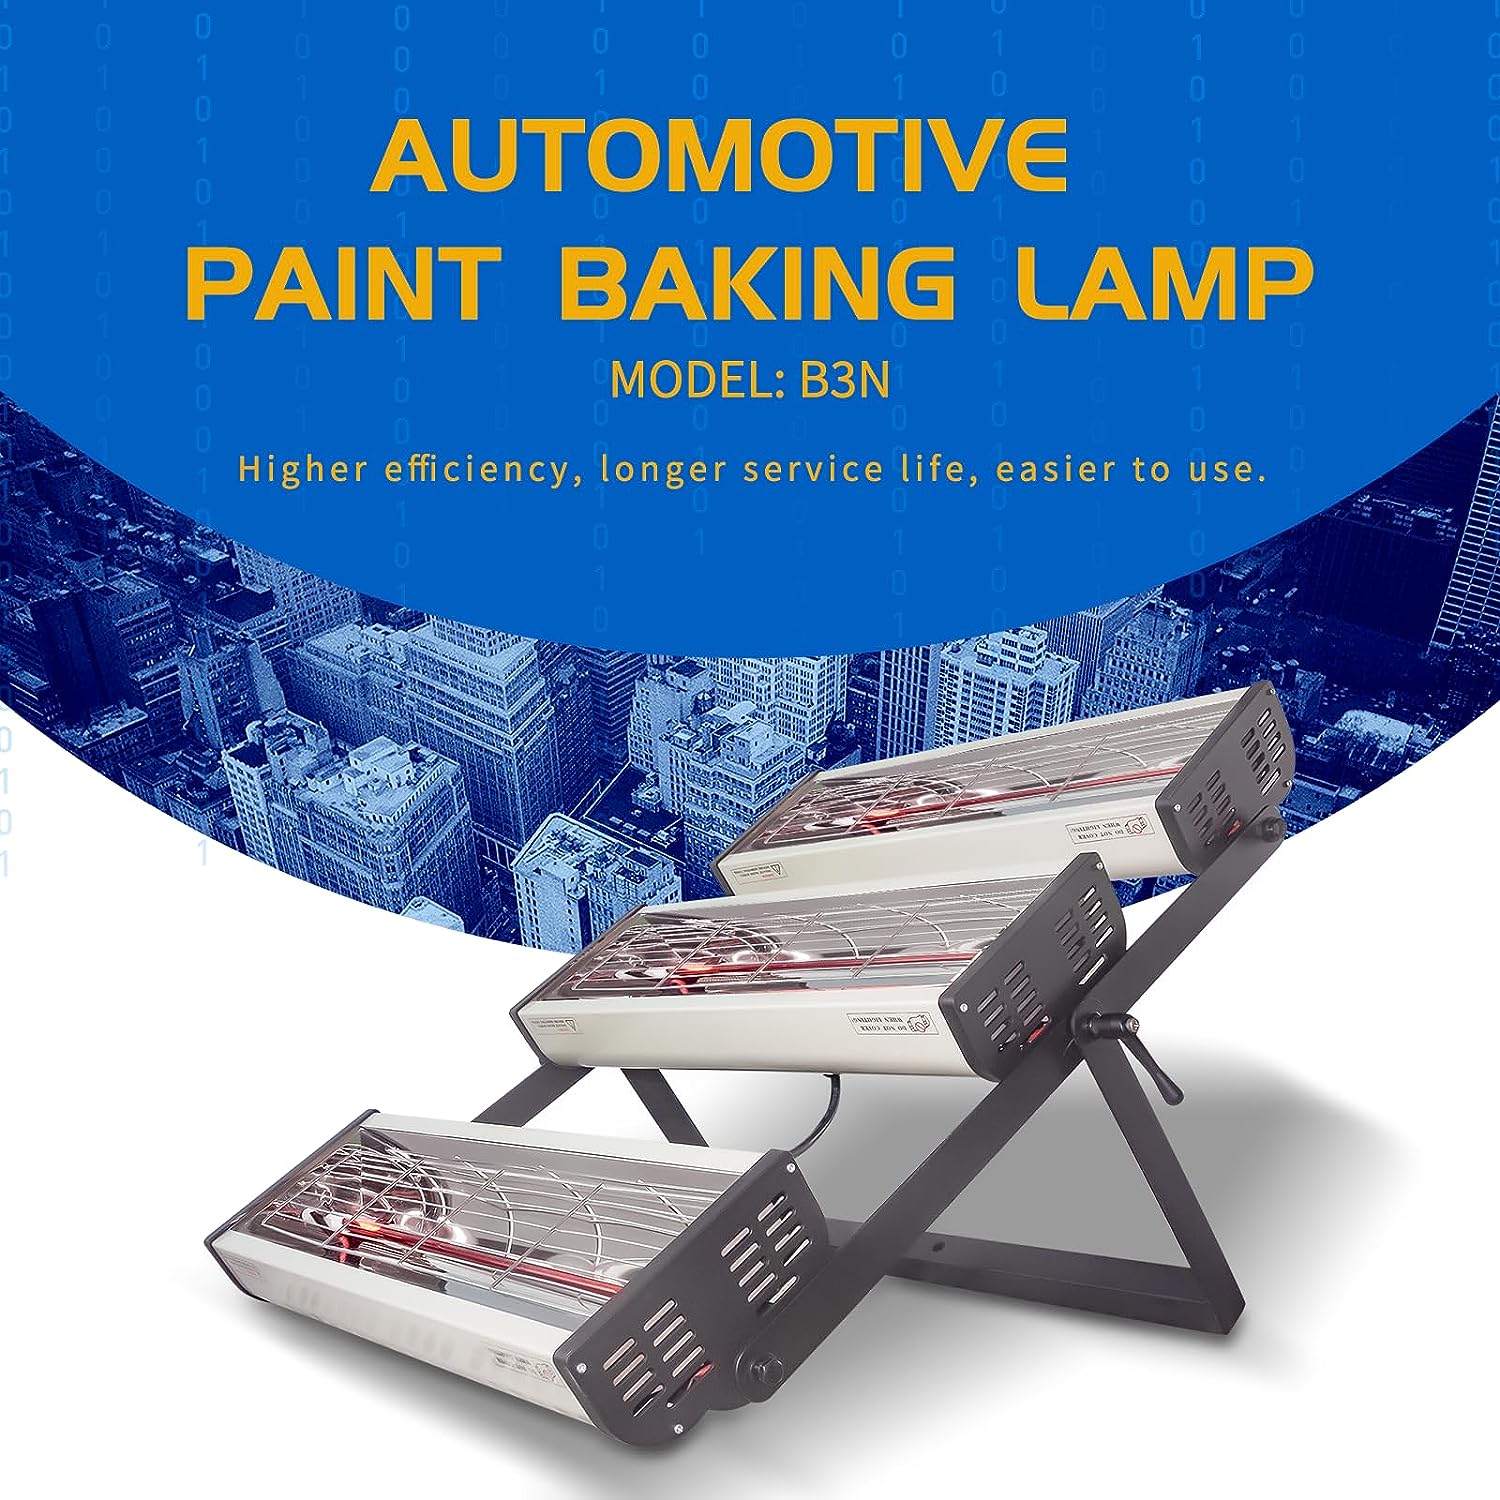 Solary Baking Infrared Paint Curing Lamp - 3000W 110V Short Wave Infrared Paint Dryer Lamp for Car Bodywork Repair - Auto Body Collision Repair Welding Products